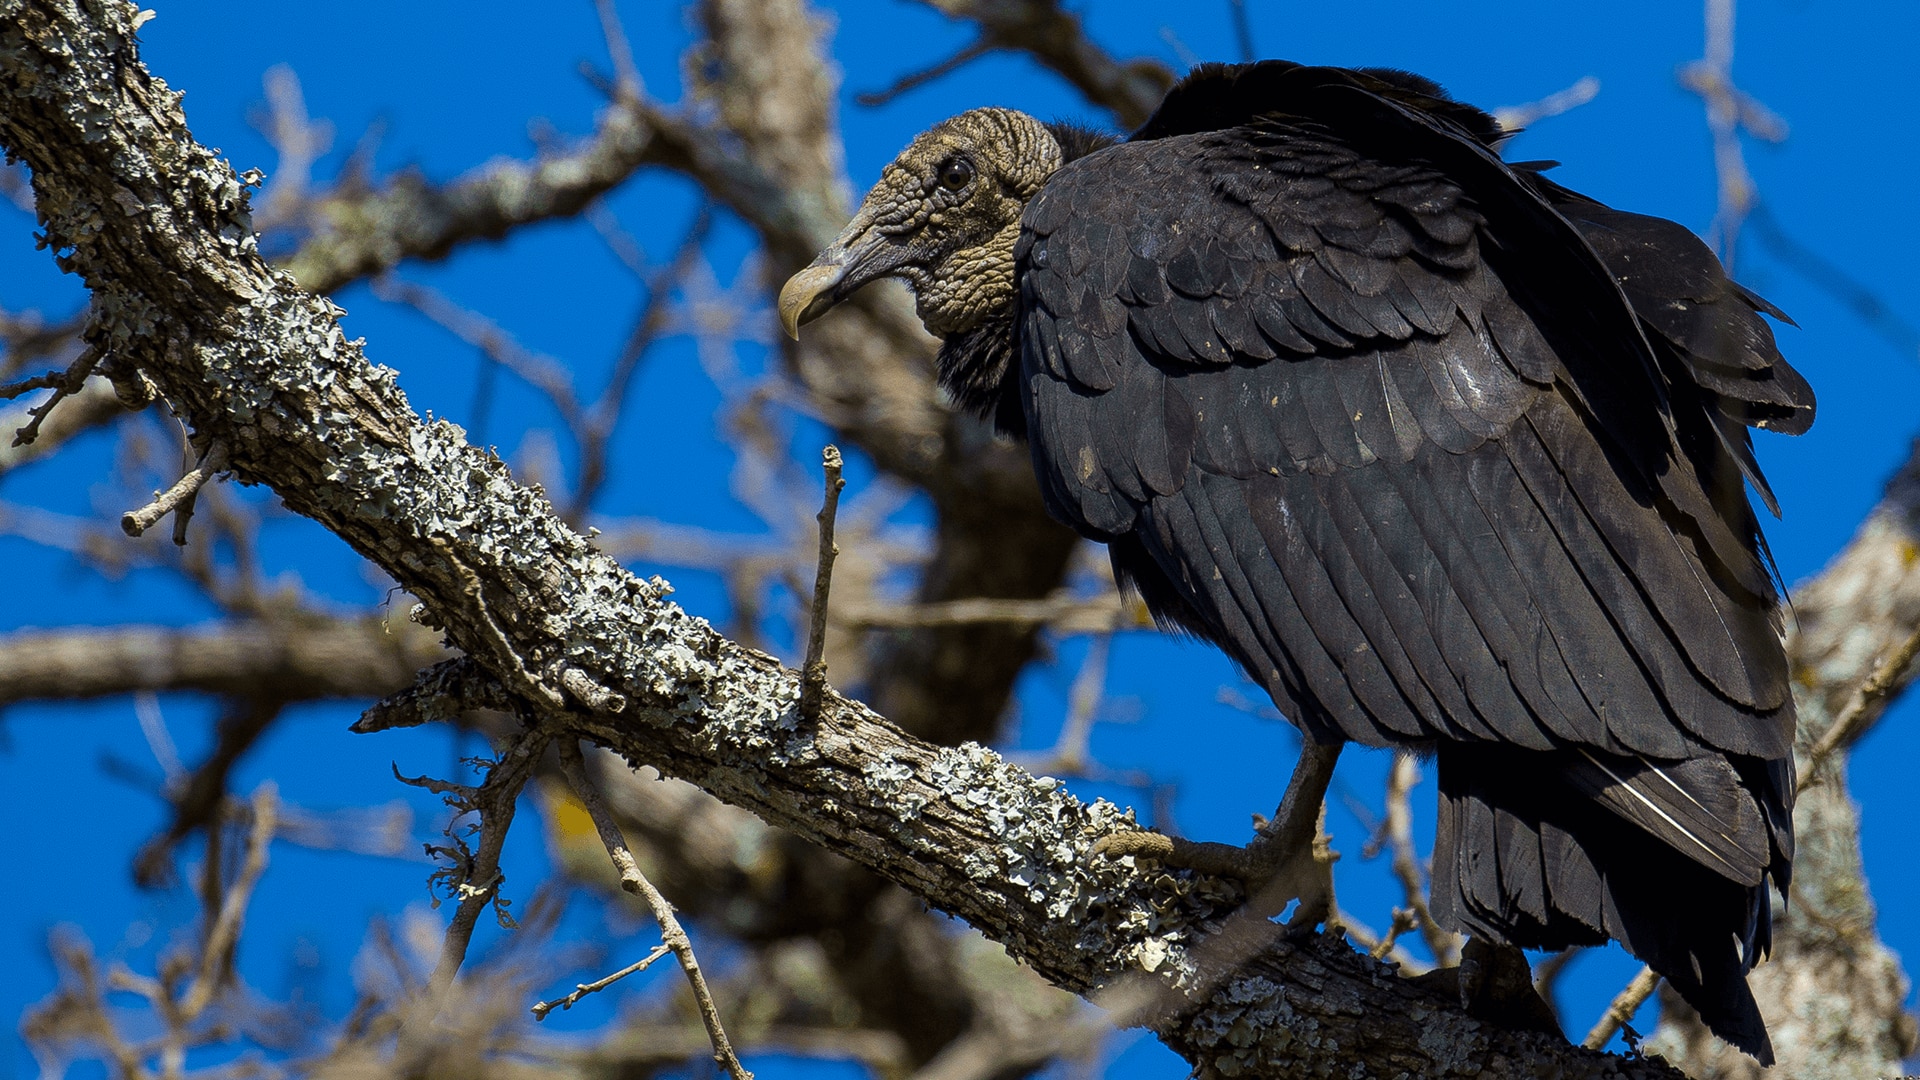 Black vulture standing in a tree